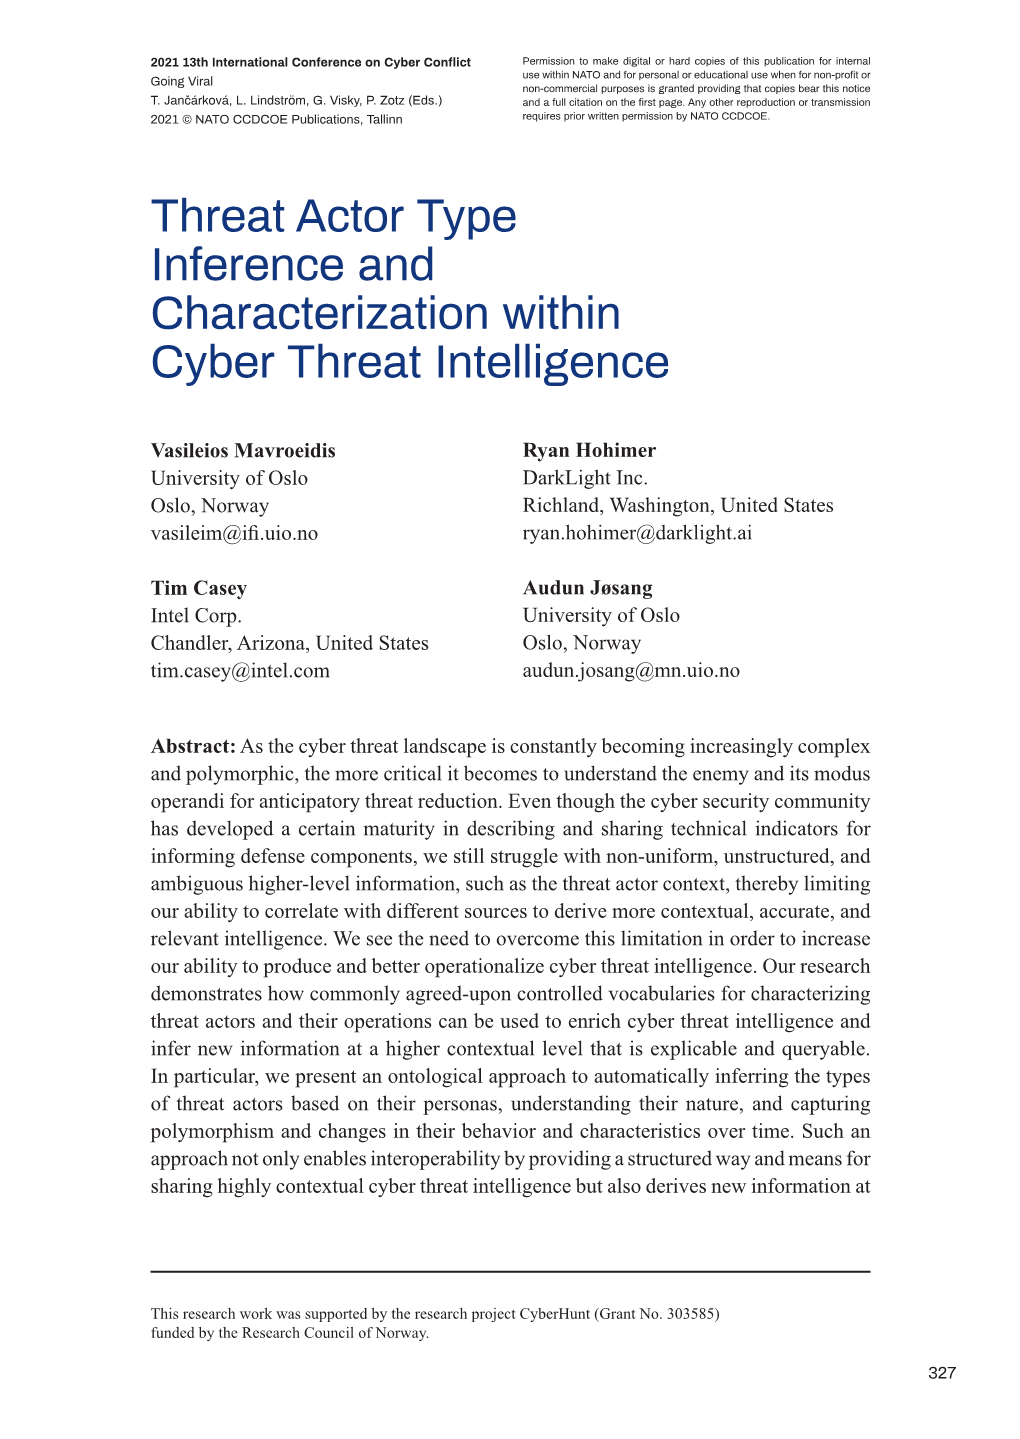 Threat Actor Type Inference and Characterization Within Cyber Threat Intelligence